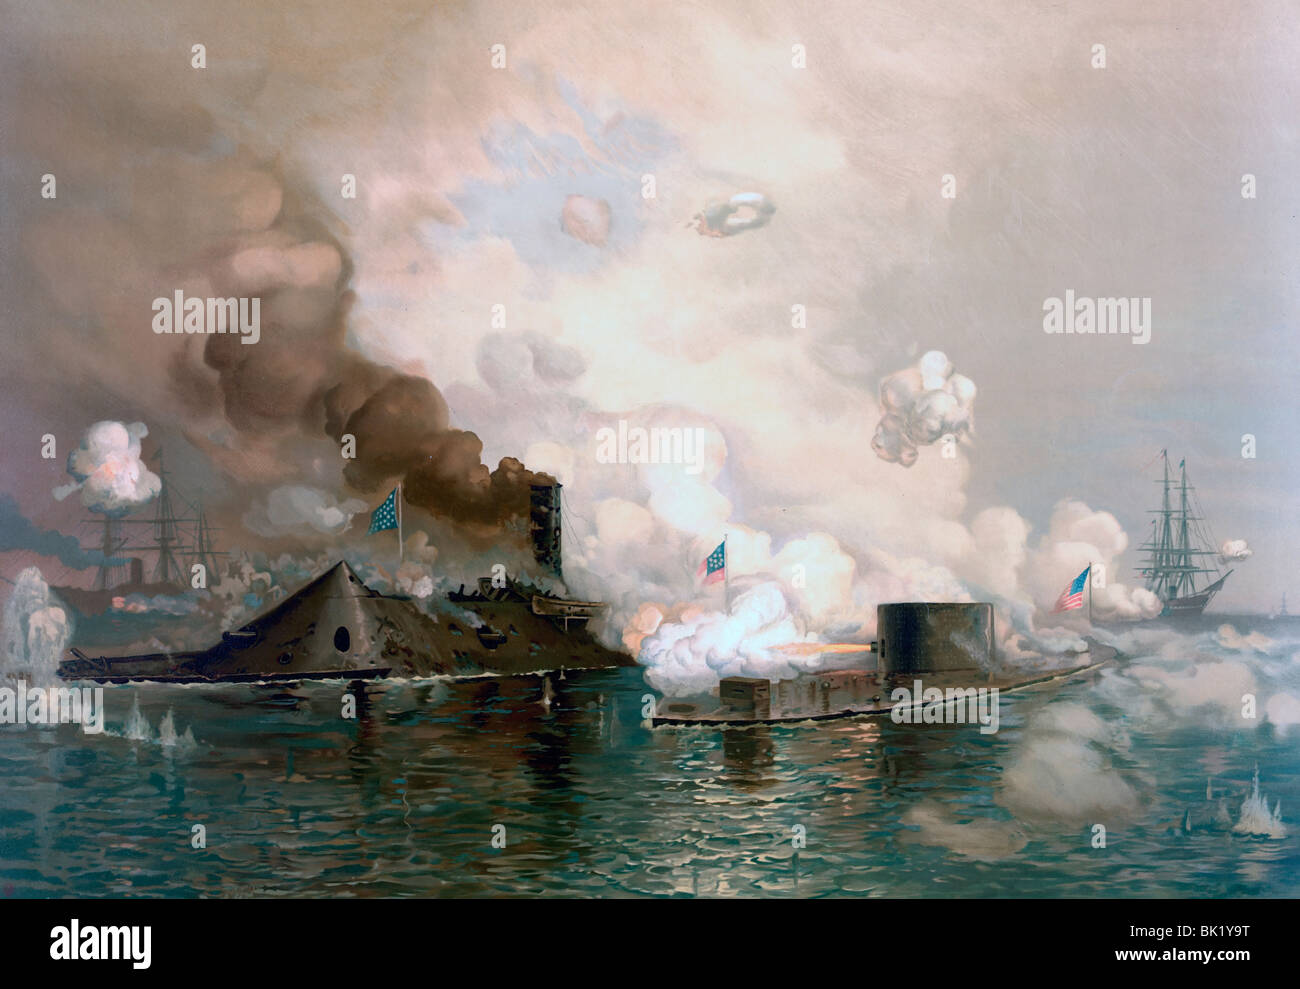 The Monitor vs The Merrimac - Battle of Hampton Roads - March 8–9, 1862 - Battle of the Ironclads - USA Civil War Stock Photo